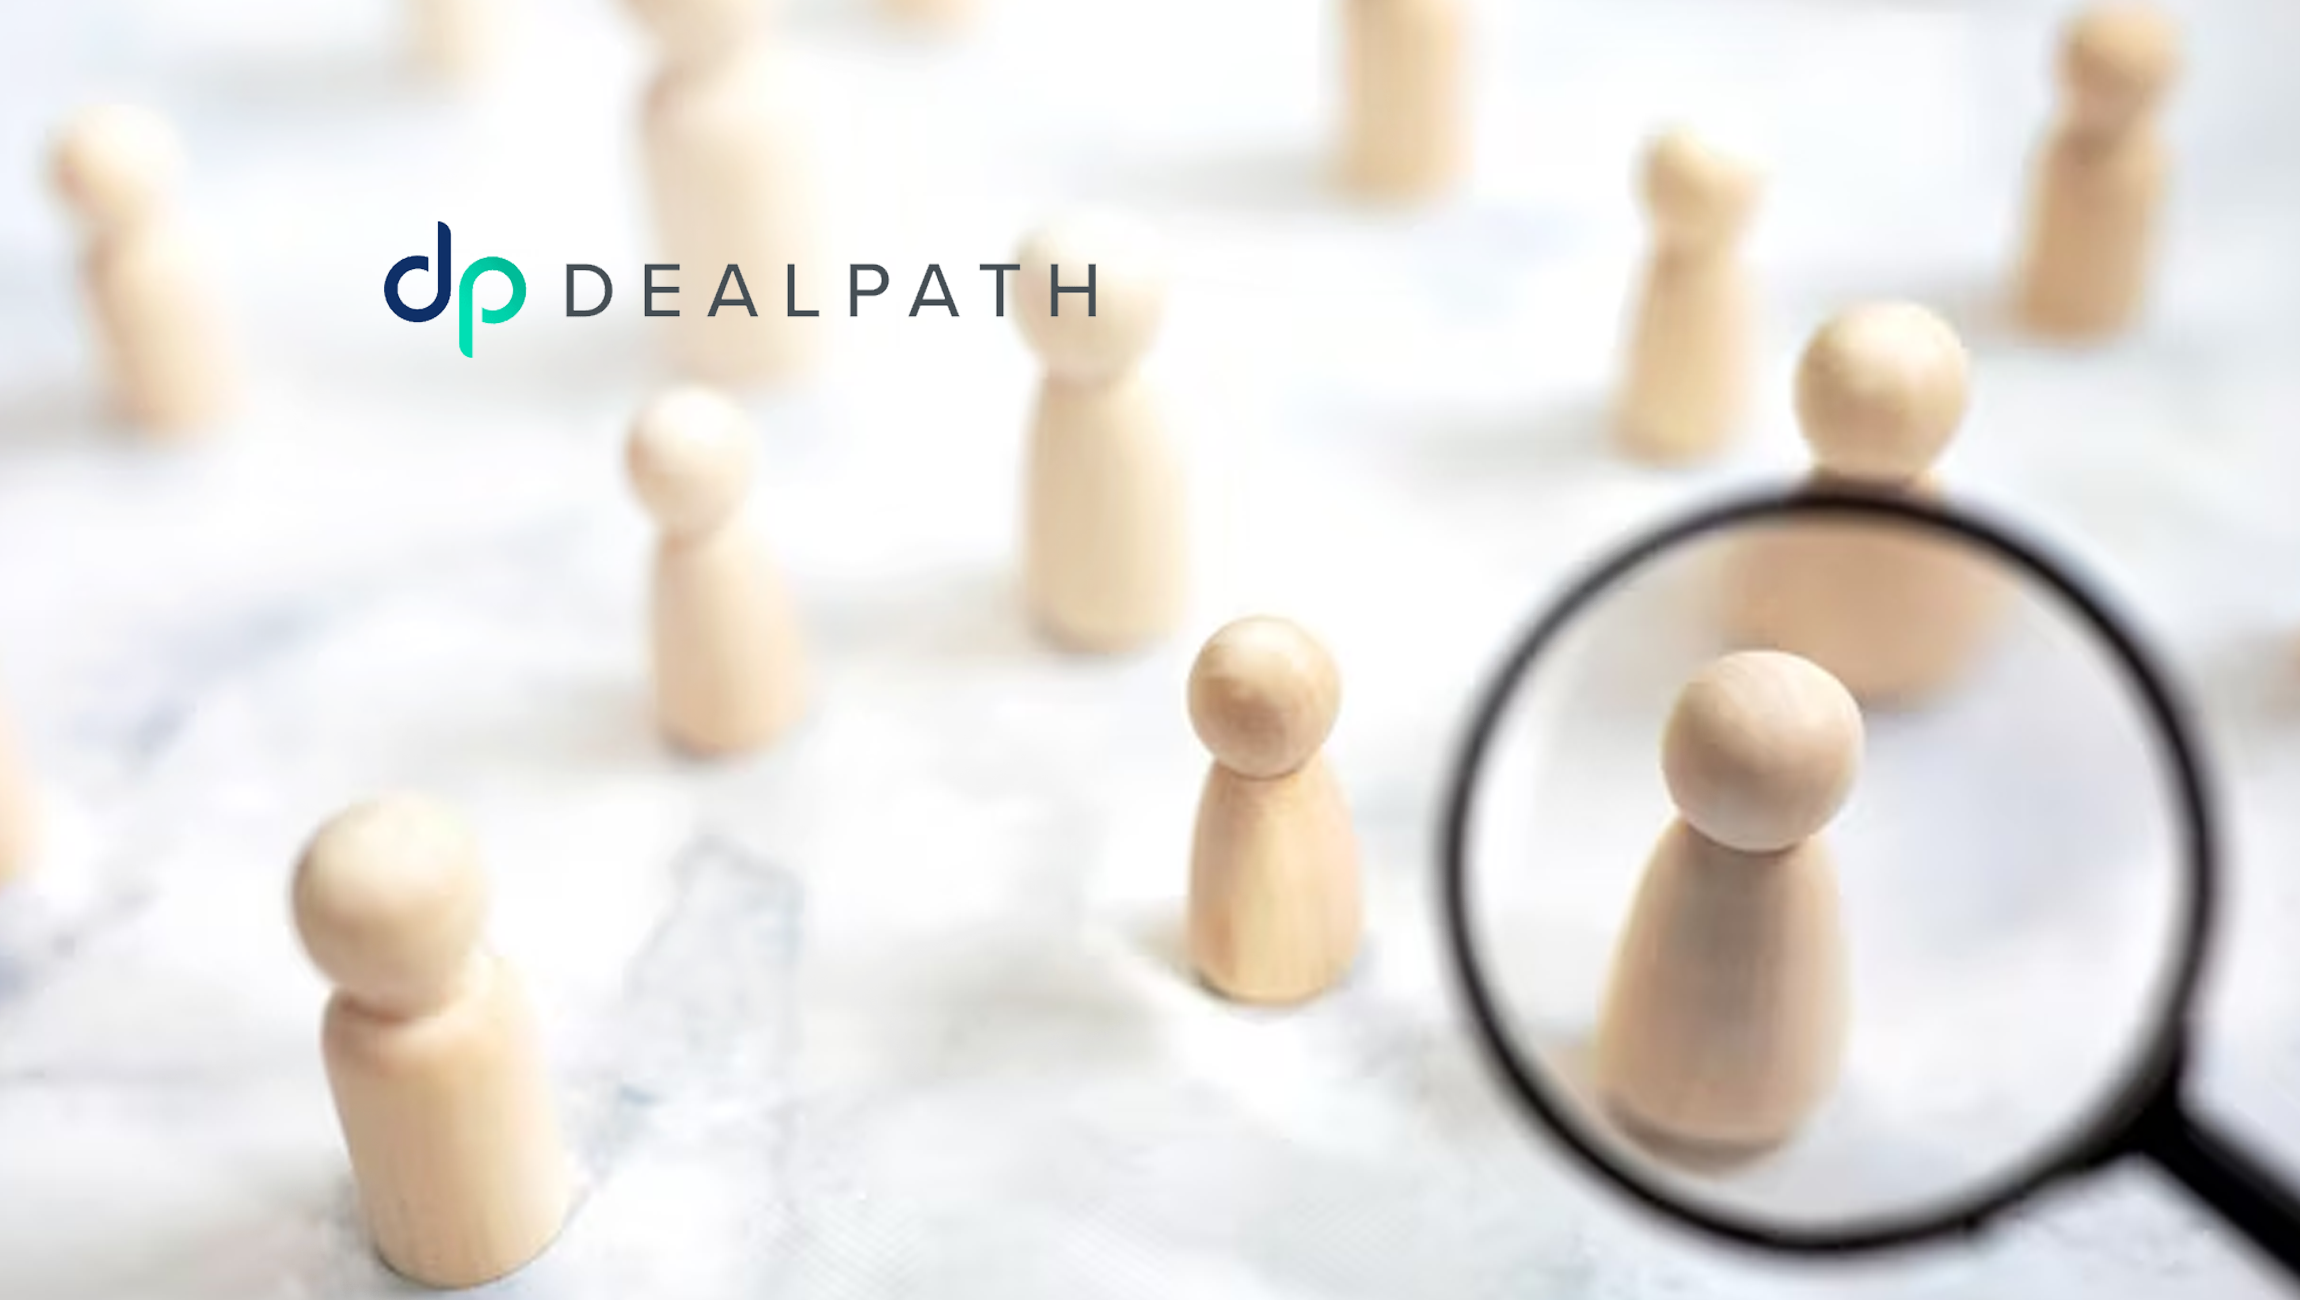 Dealpath Expands Global Leadership with Addition of Jason Lo as Managing Director and Head of Canada